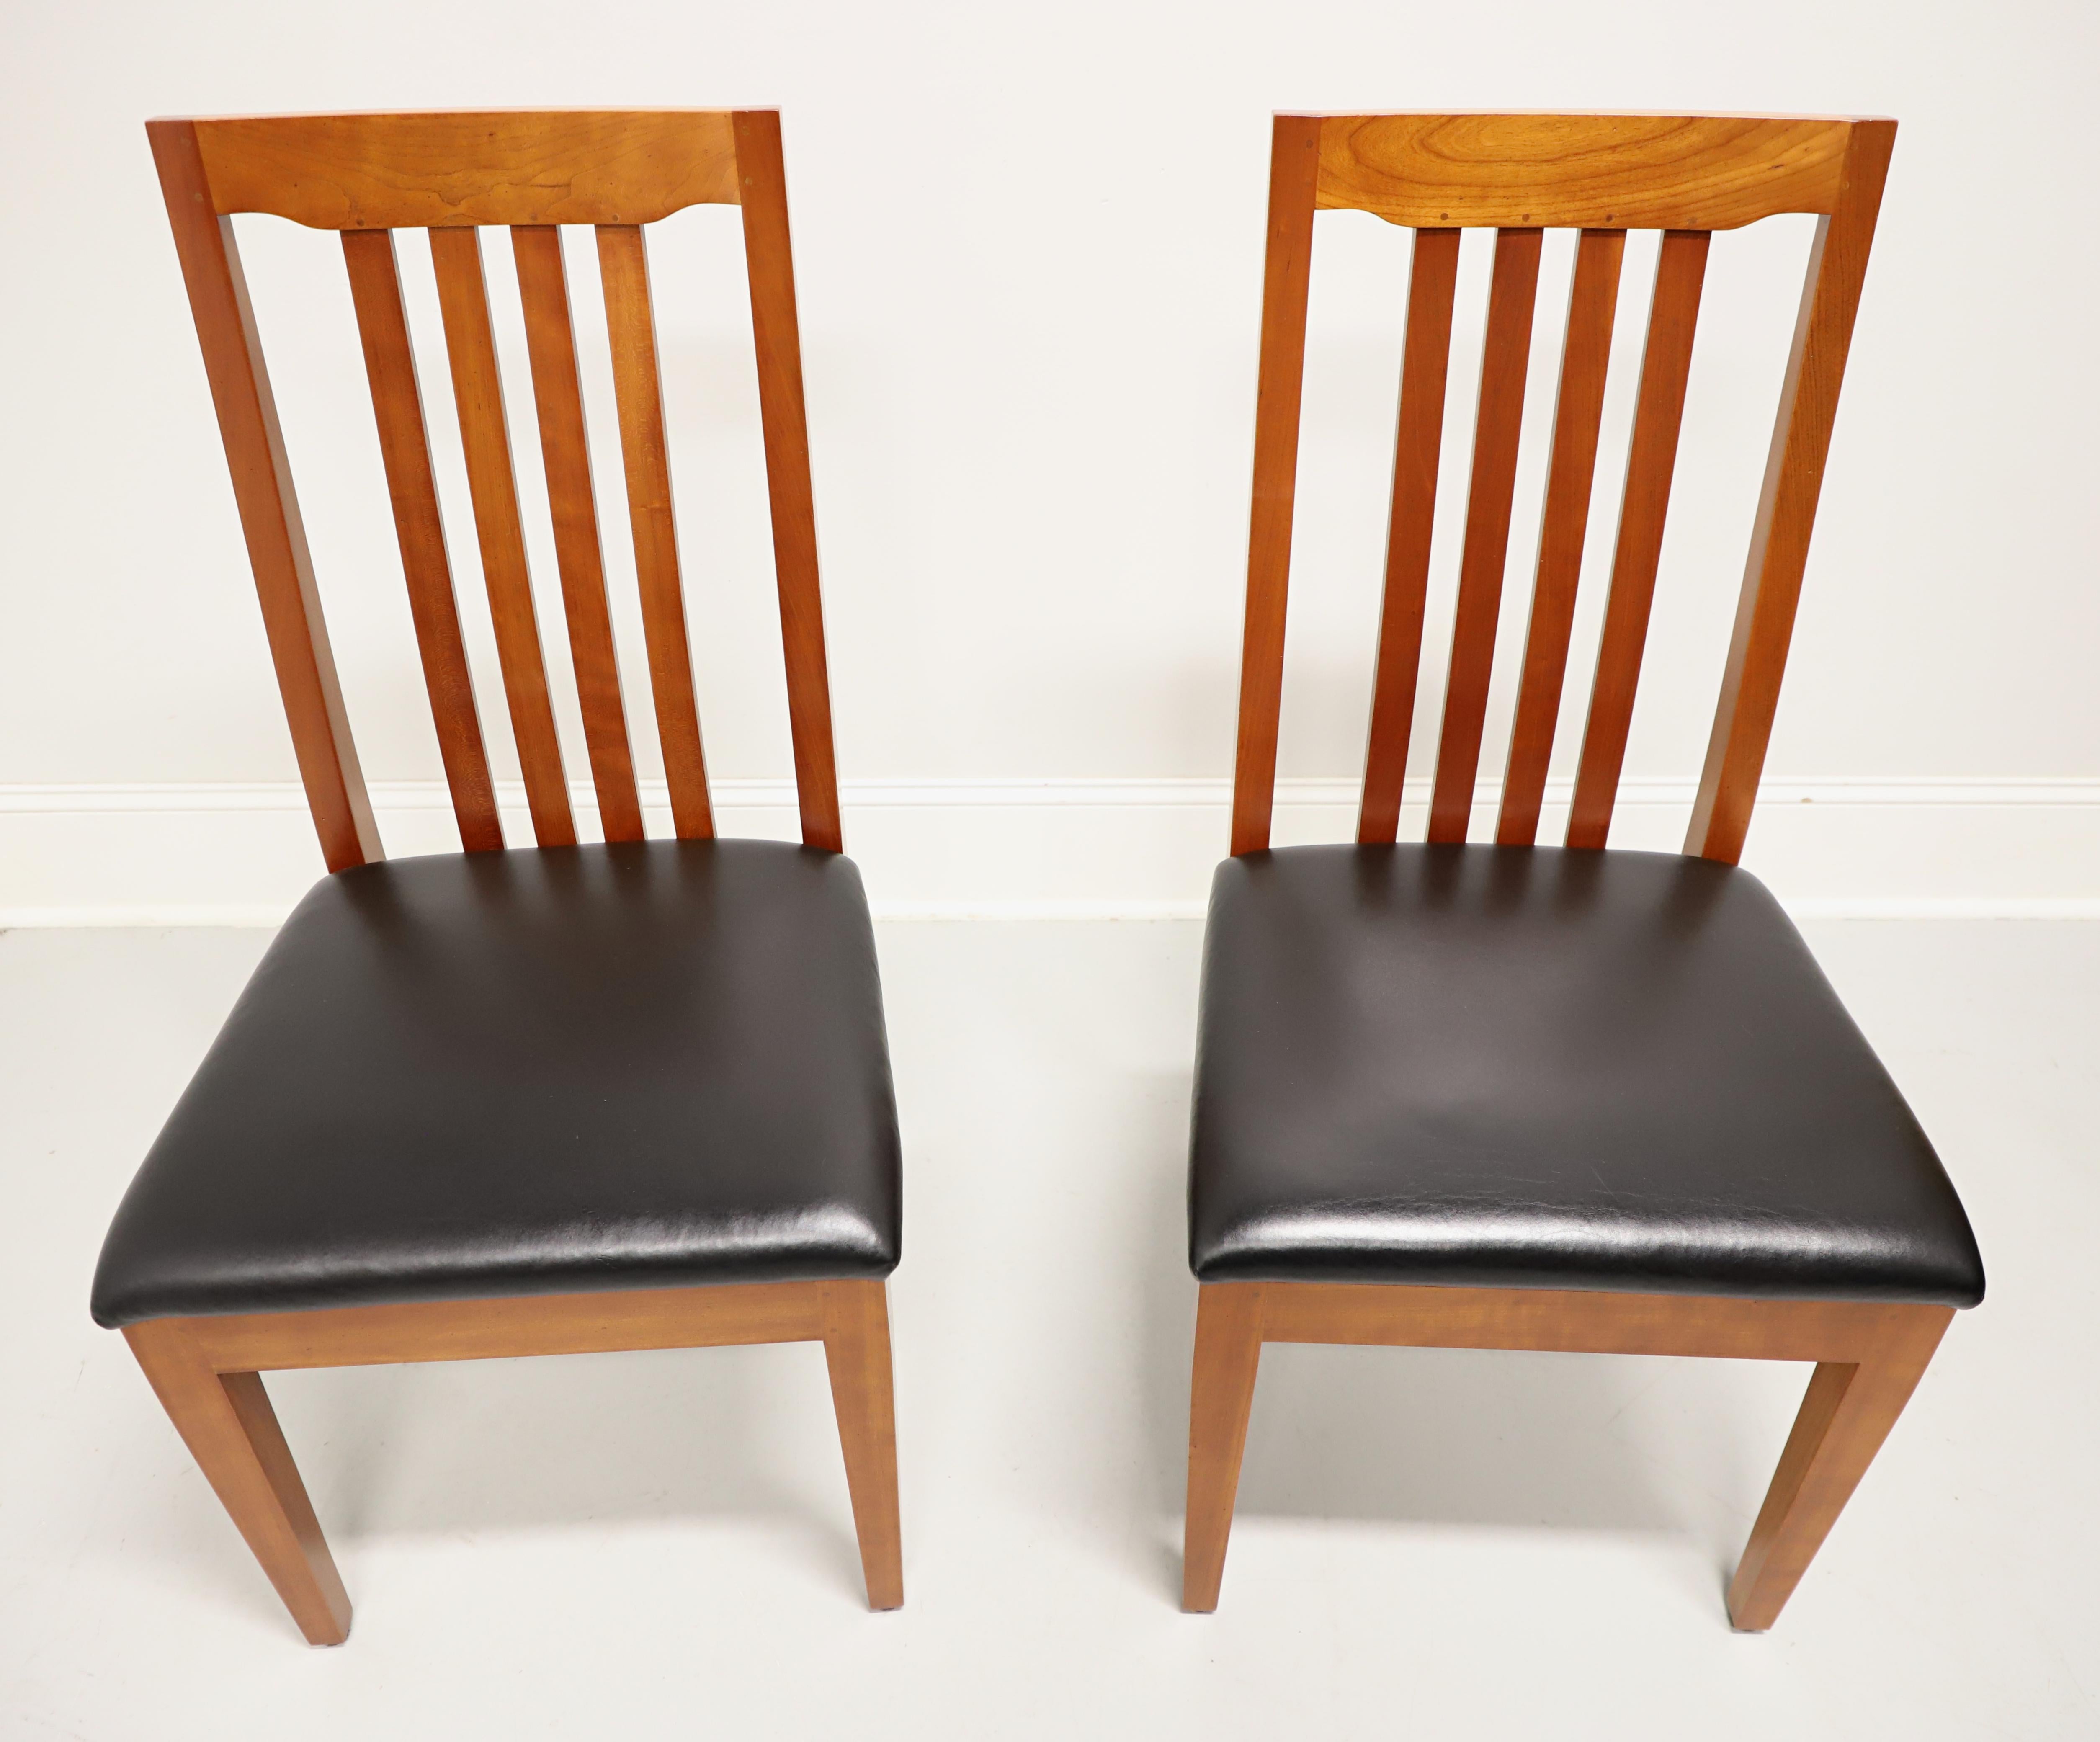 A pair of custom crafted dining side chairs in the Mission style by Robert Bergelin Co, of Morganton, North Carolina, USA. Handmade of cherry wood with open slat backs, black leather upholstered seat, and tapered straight front legs. Made in the